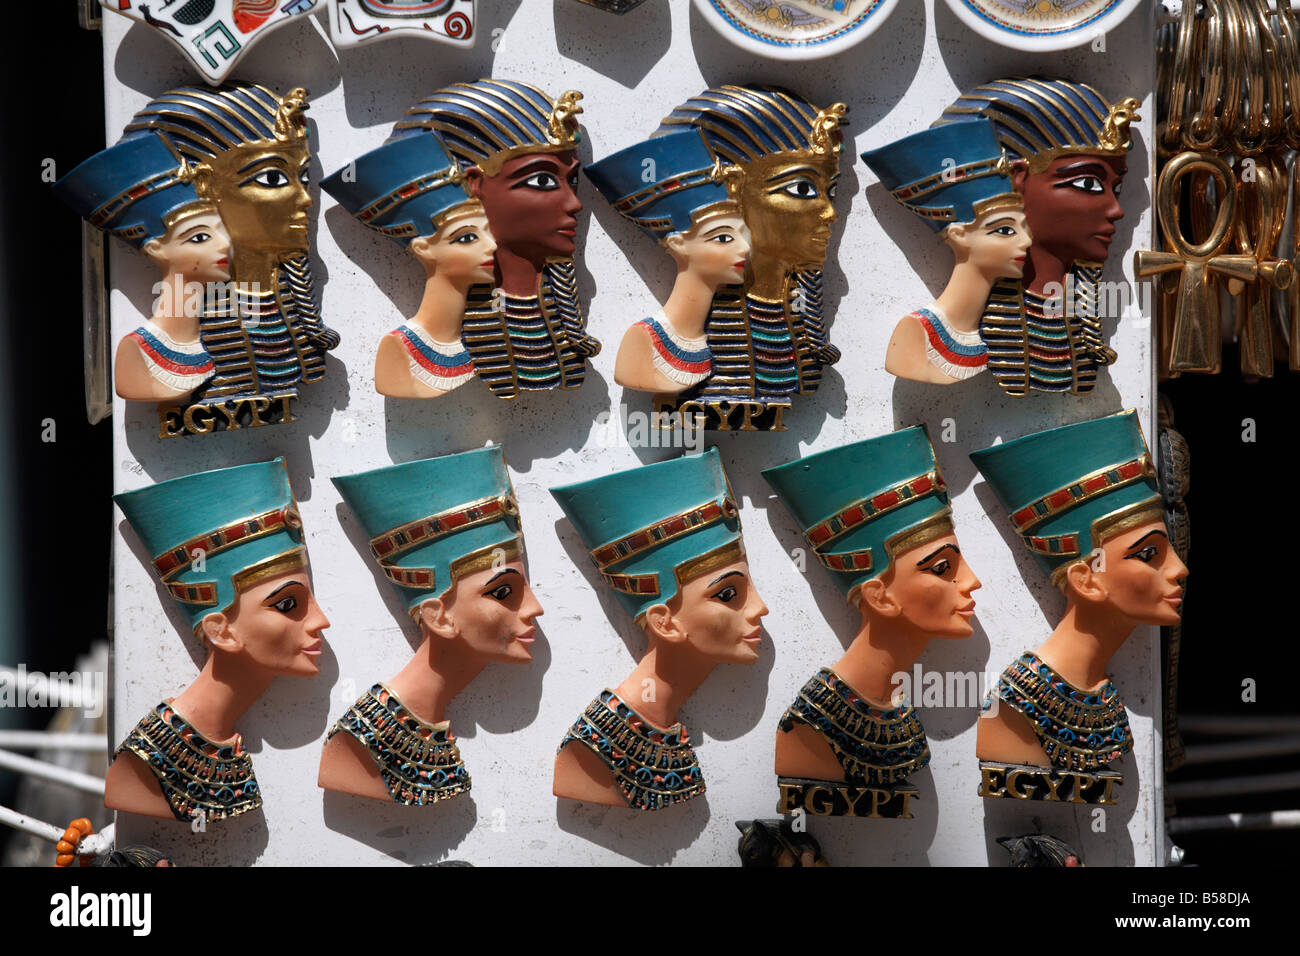 Various Egyptian badges depicting pharaohs, on sale at Aswan Souq, Aswan, Egypt, North Africa, Africa Stock Photo